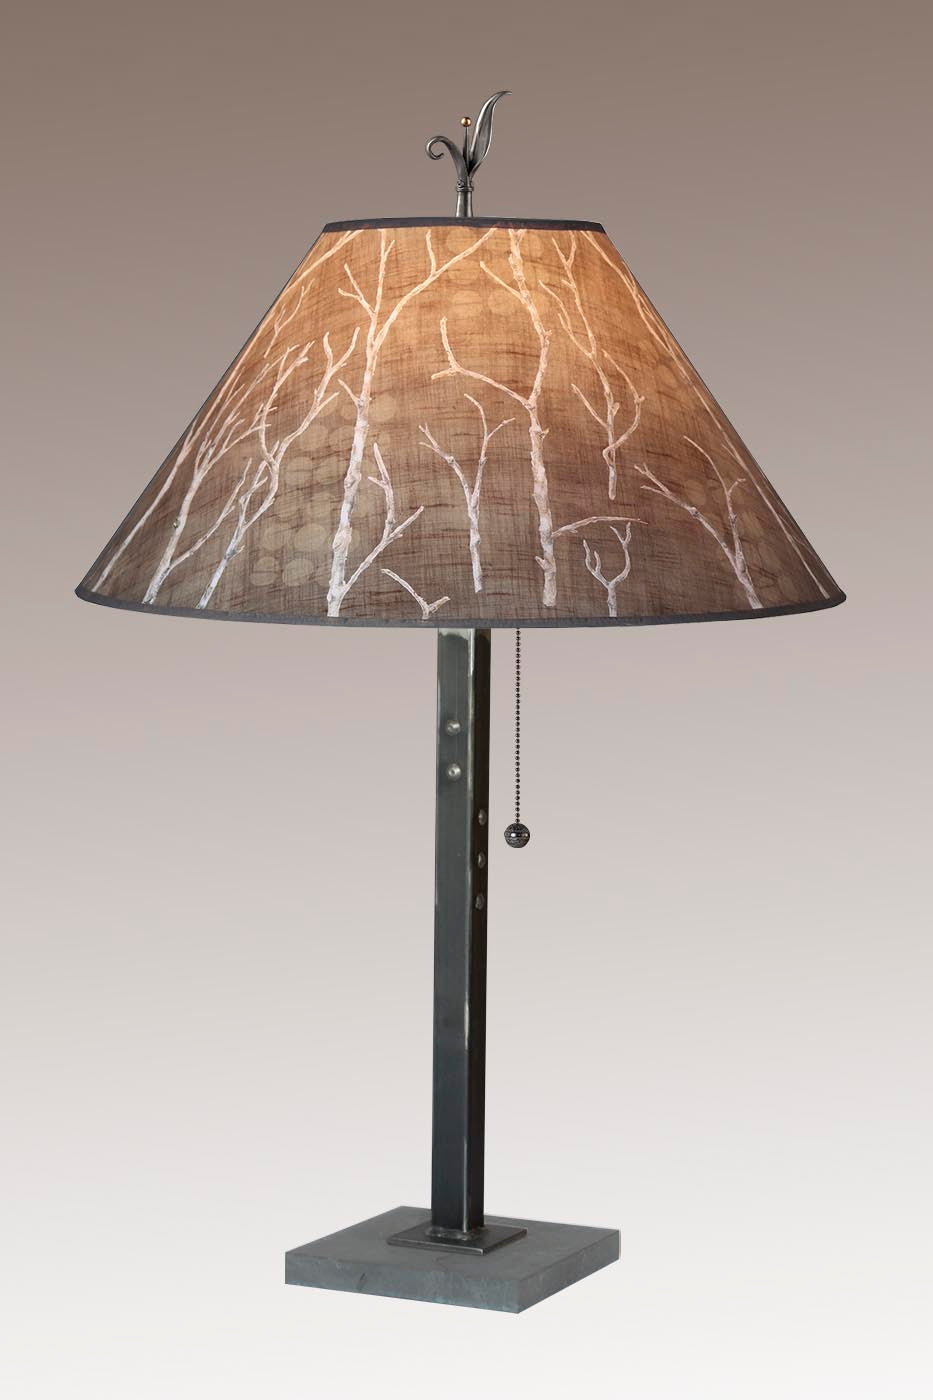 Janna Ugone &amp; Co Table Lamp Steel Table Lamp with Large Conical Shade in Twigs